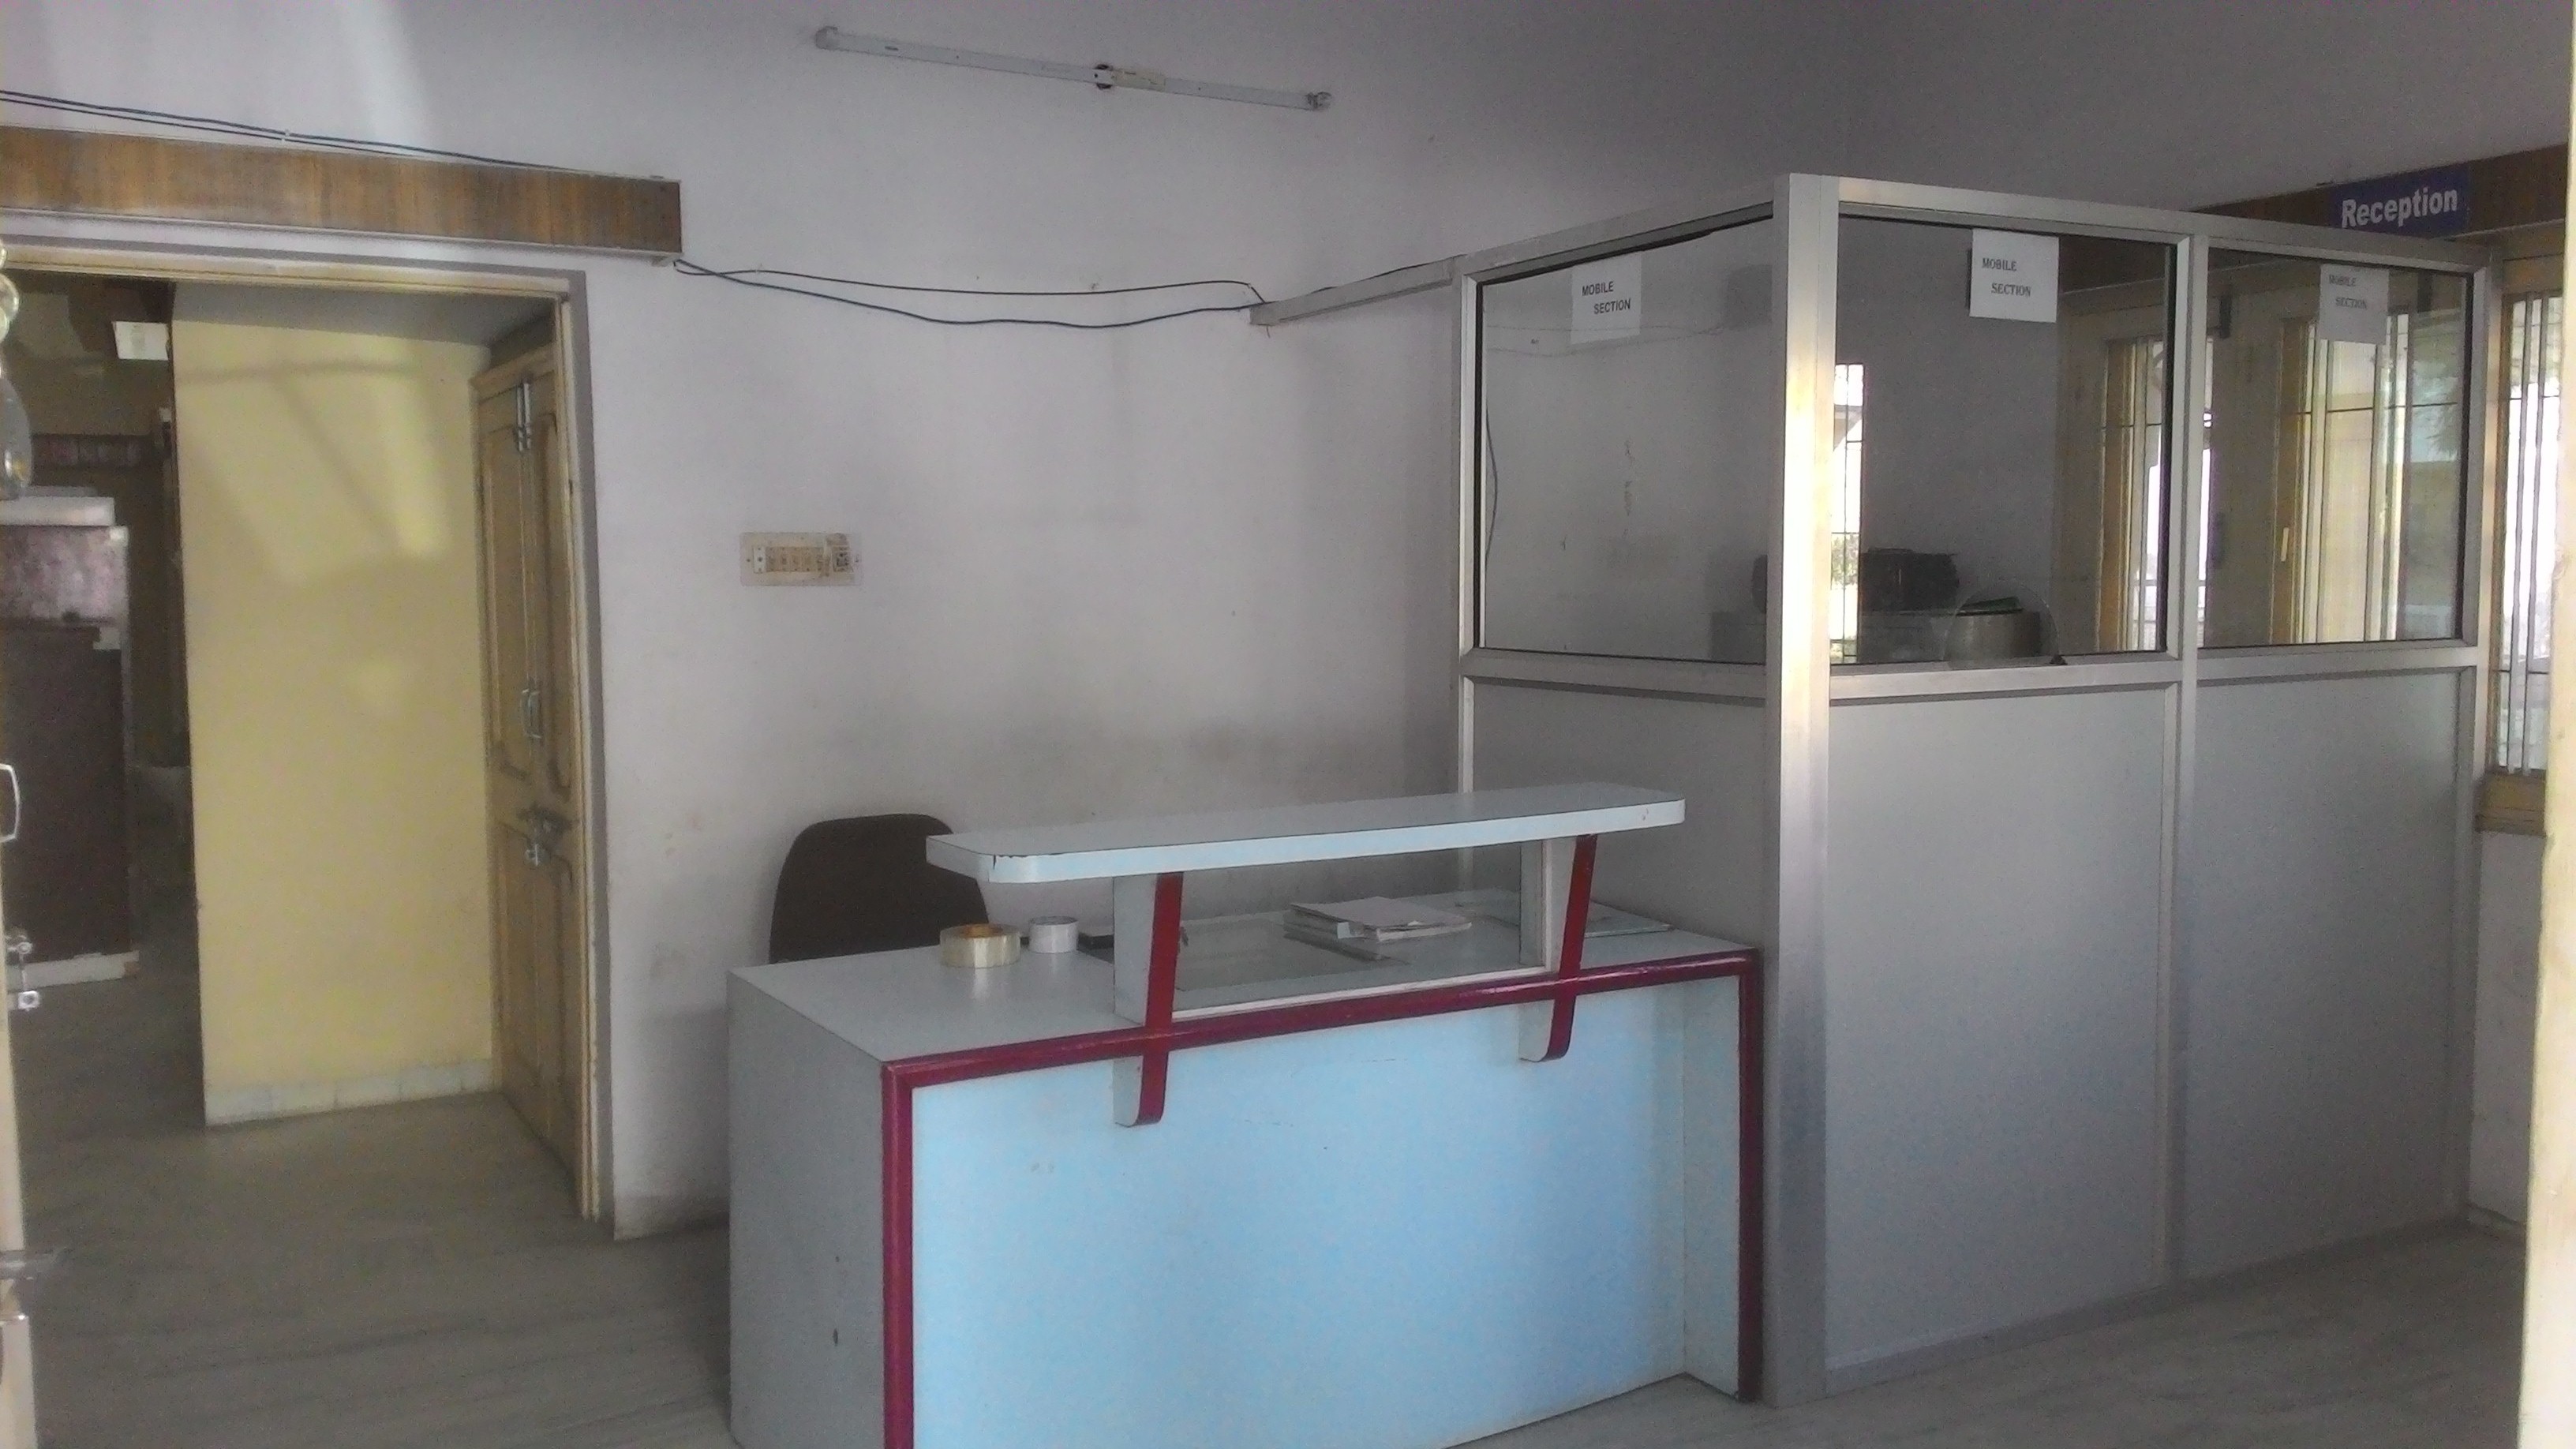 4 BHK GF House for commercial use for office  institute BPO etc  Call 9829010434